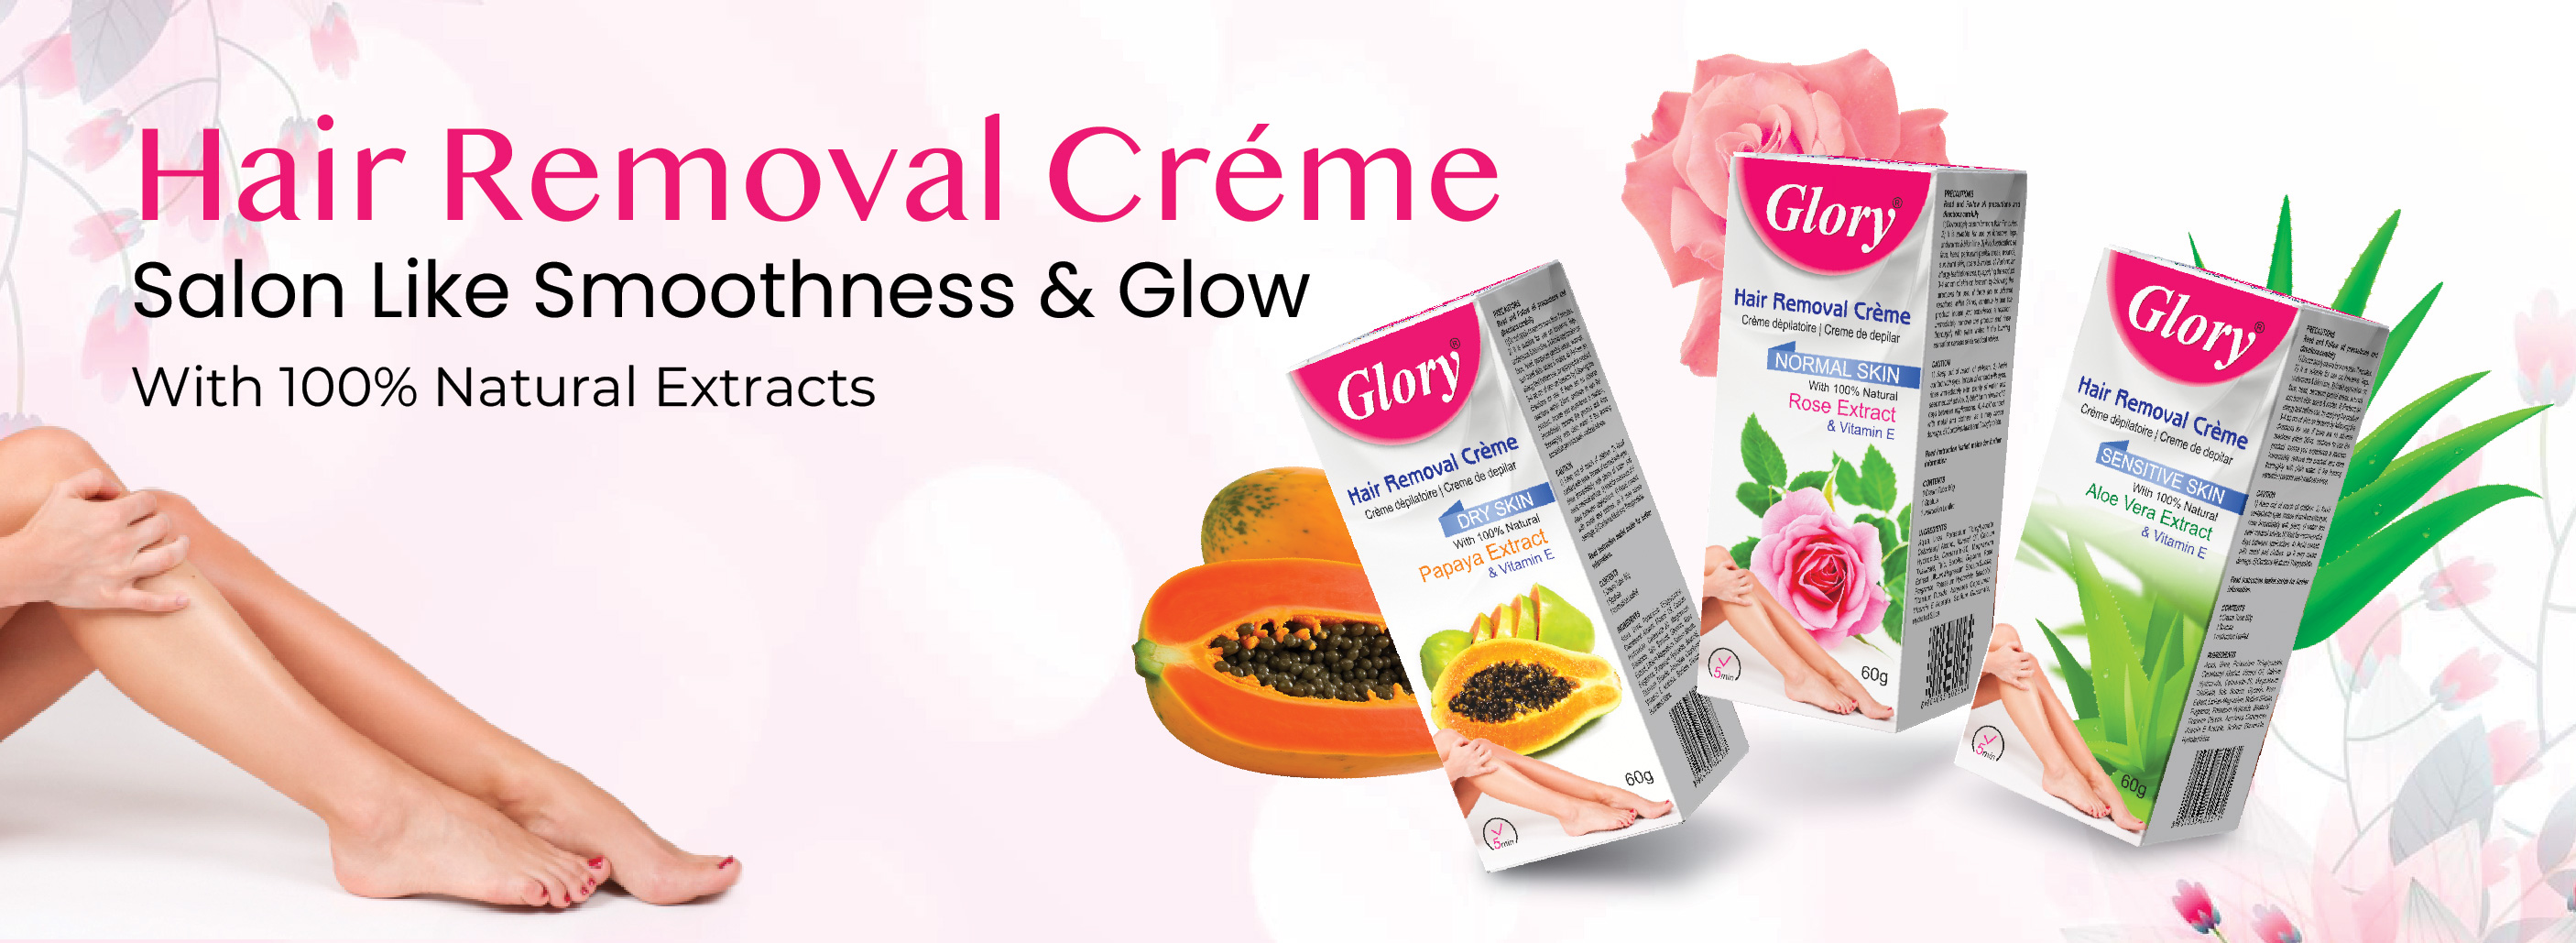 Hair Removal Creme Manufacturer | Hair Removal Creme Manufacturer in Indonesia